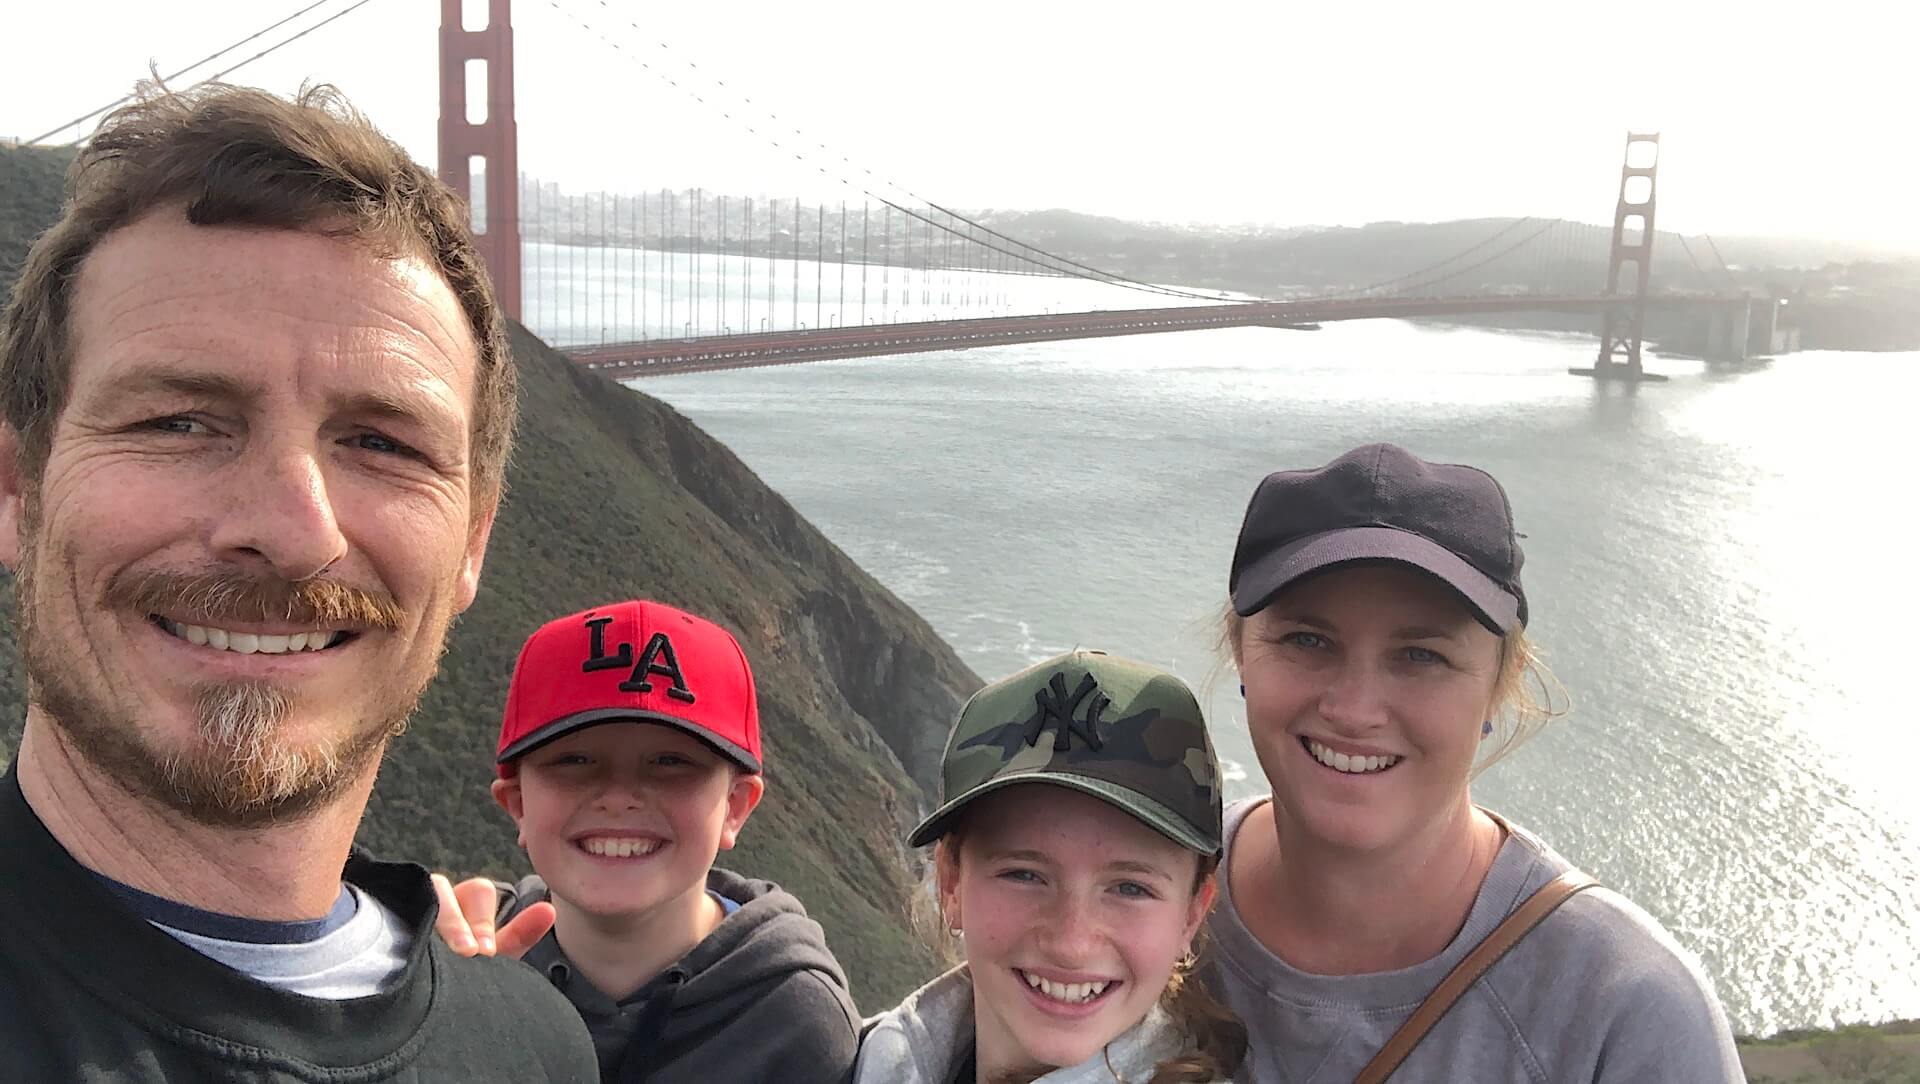 A family with parents and their young son and daughter posing in front of golden gate bridge